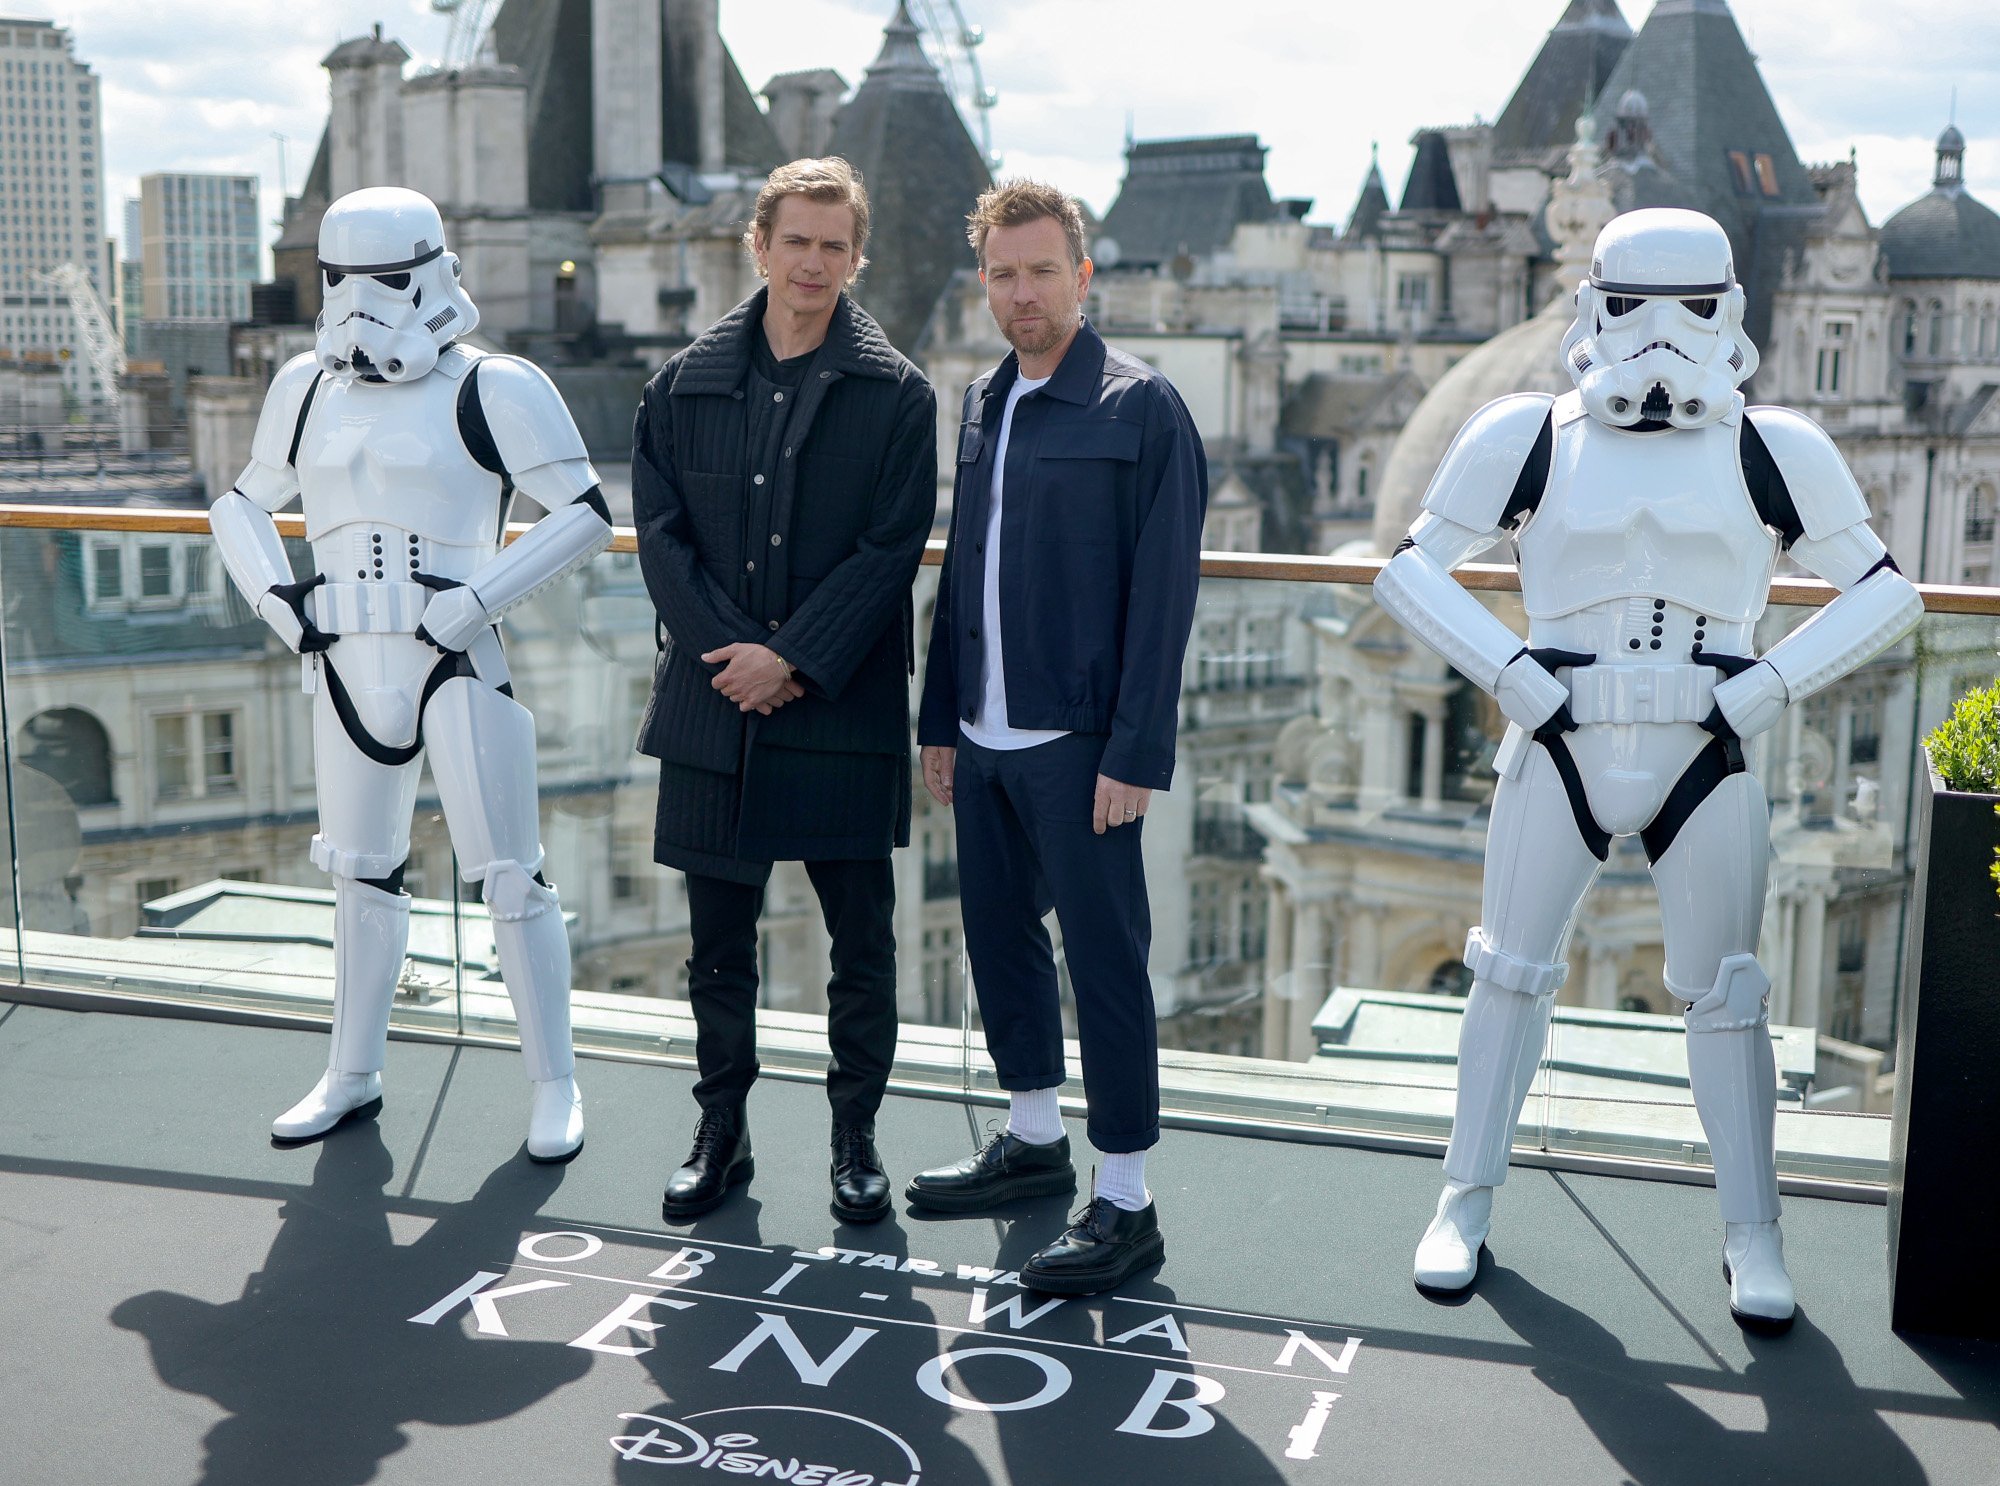 'Obi-Wan Kenobi' stars Hayden Christensen and Ewan McGregor, both of whom have very different net worths. They're standing between two Stomtroopers and smiling.